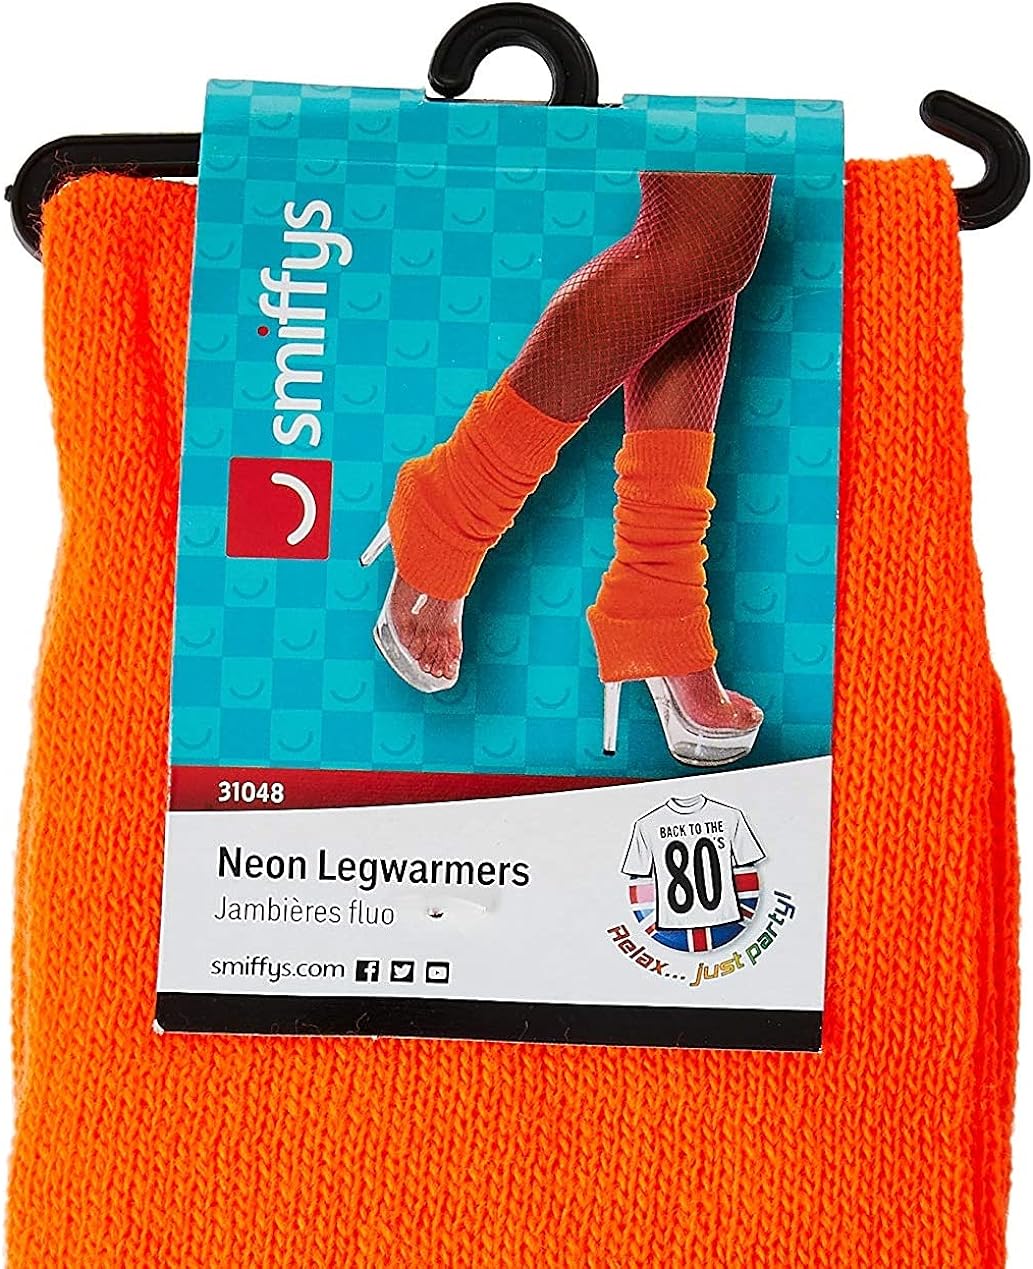 Smiffys Unisex Adult Neon Pink Leg warmers, Neon Orange, One Size, Back to the 80's